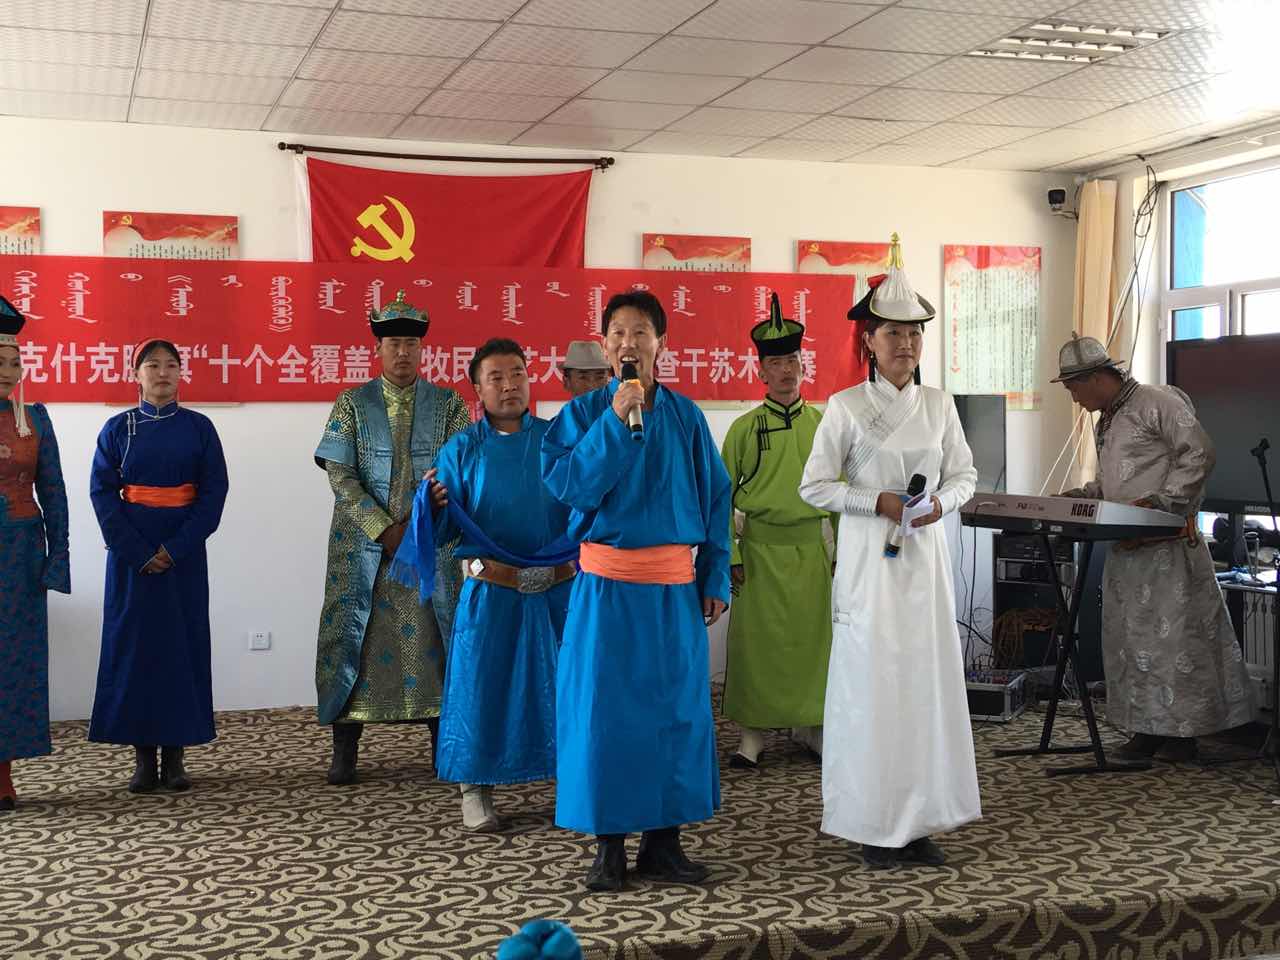 Project demonstrates success in Inner Mongolia